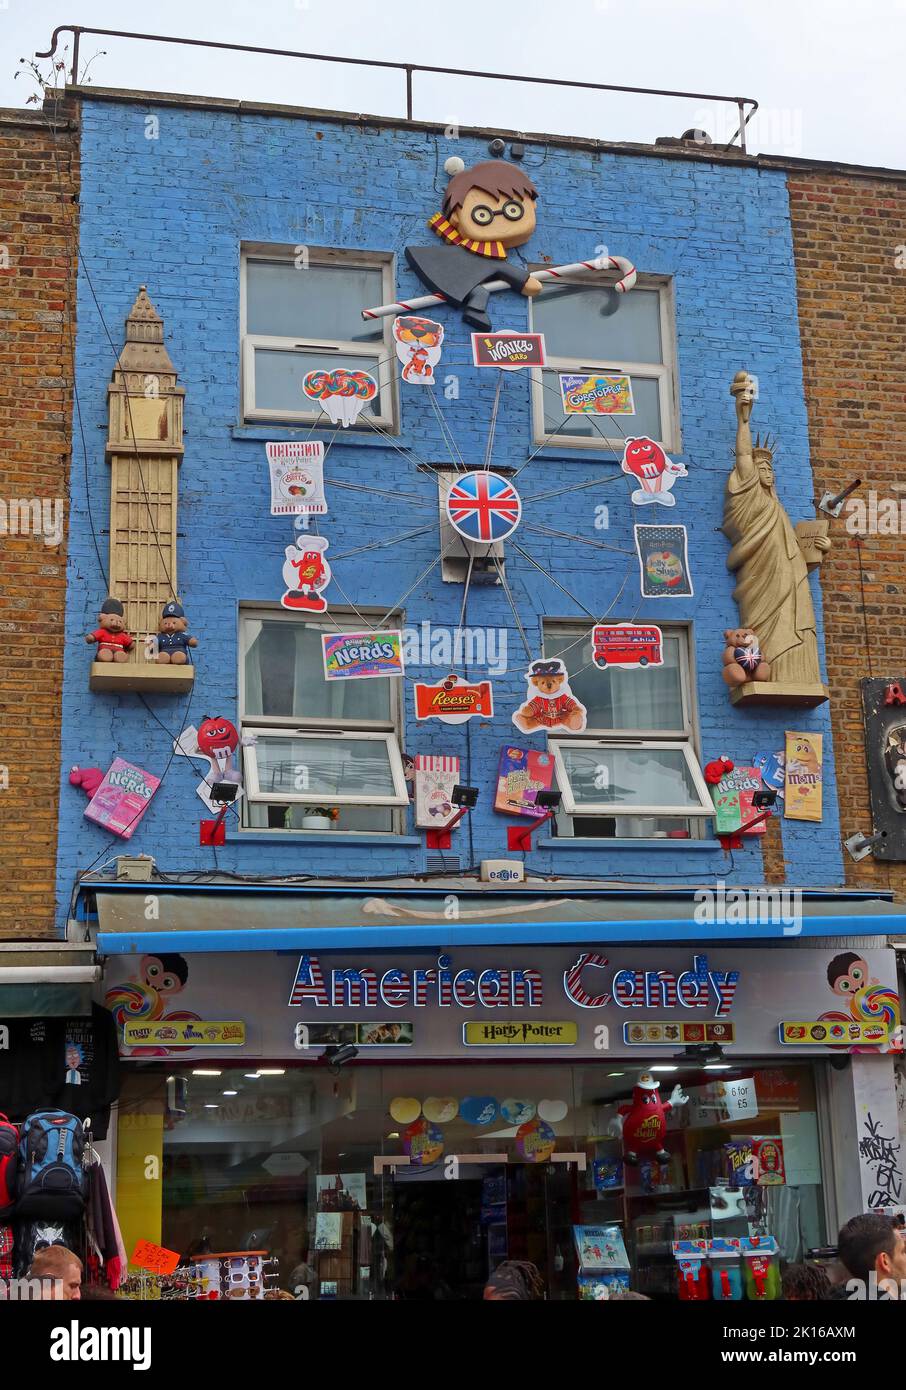 American Candy Co 197 Camden High Street, Camden Town, Londres, Angleterre, Royaume-Uni, NW1 8QR Banque D'Images